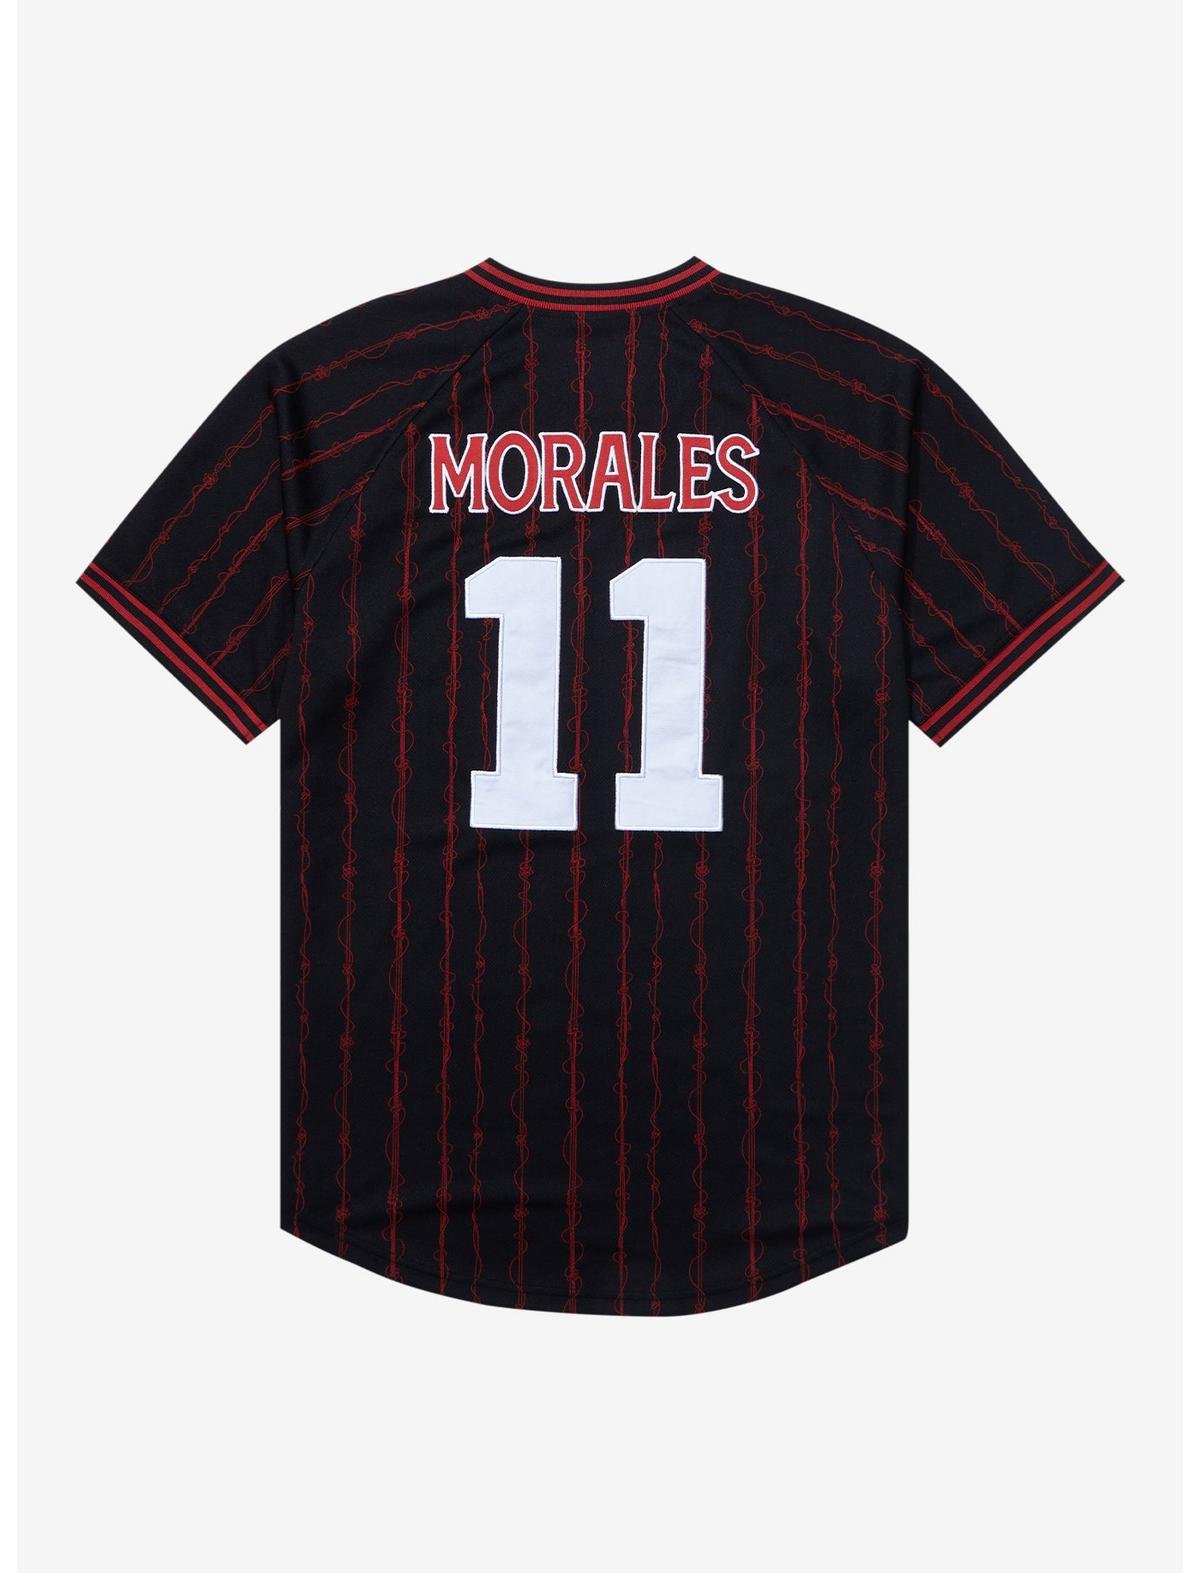 Spider-Man Across the Spider-Verse boxlunch Miles Morales jersey